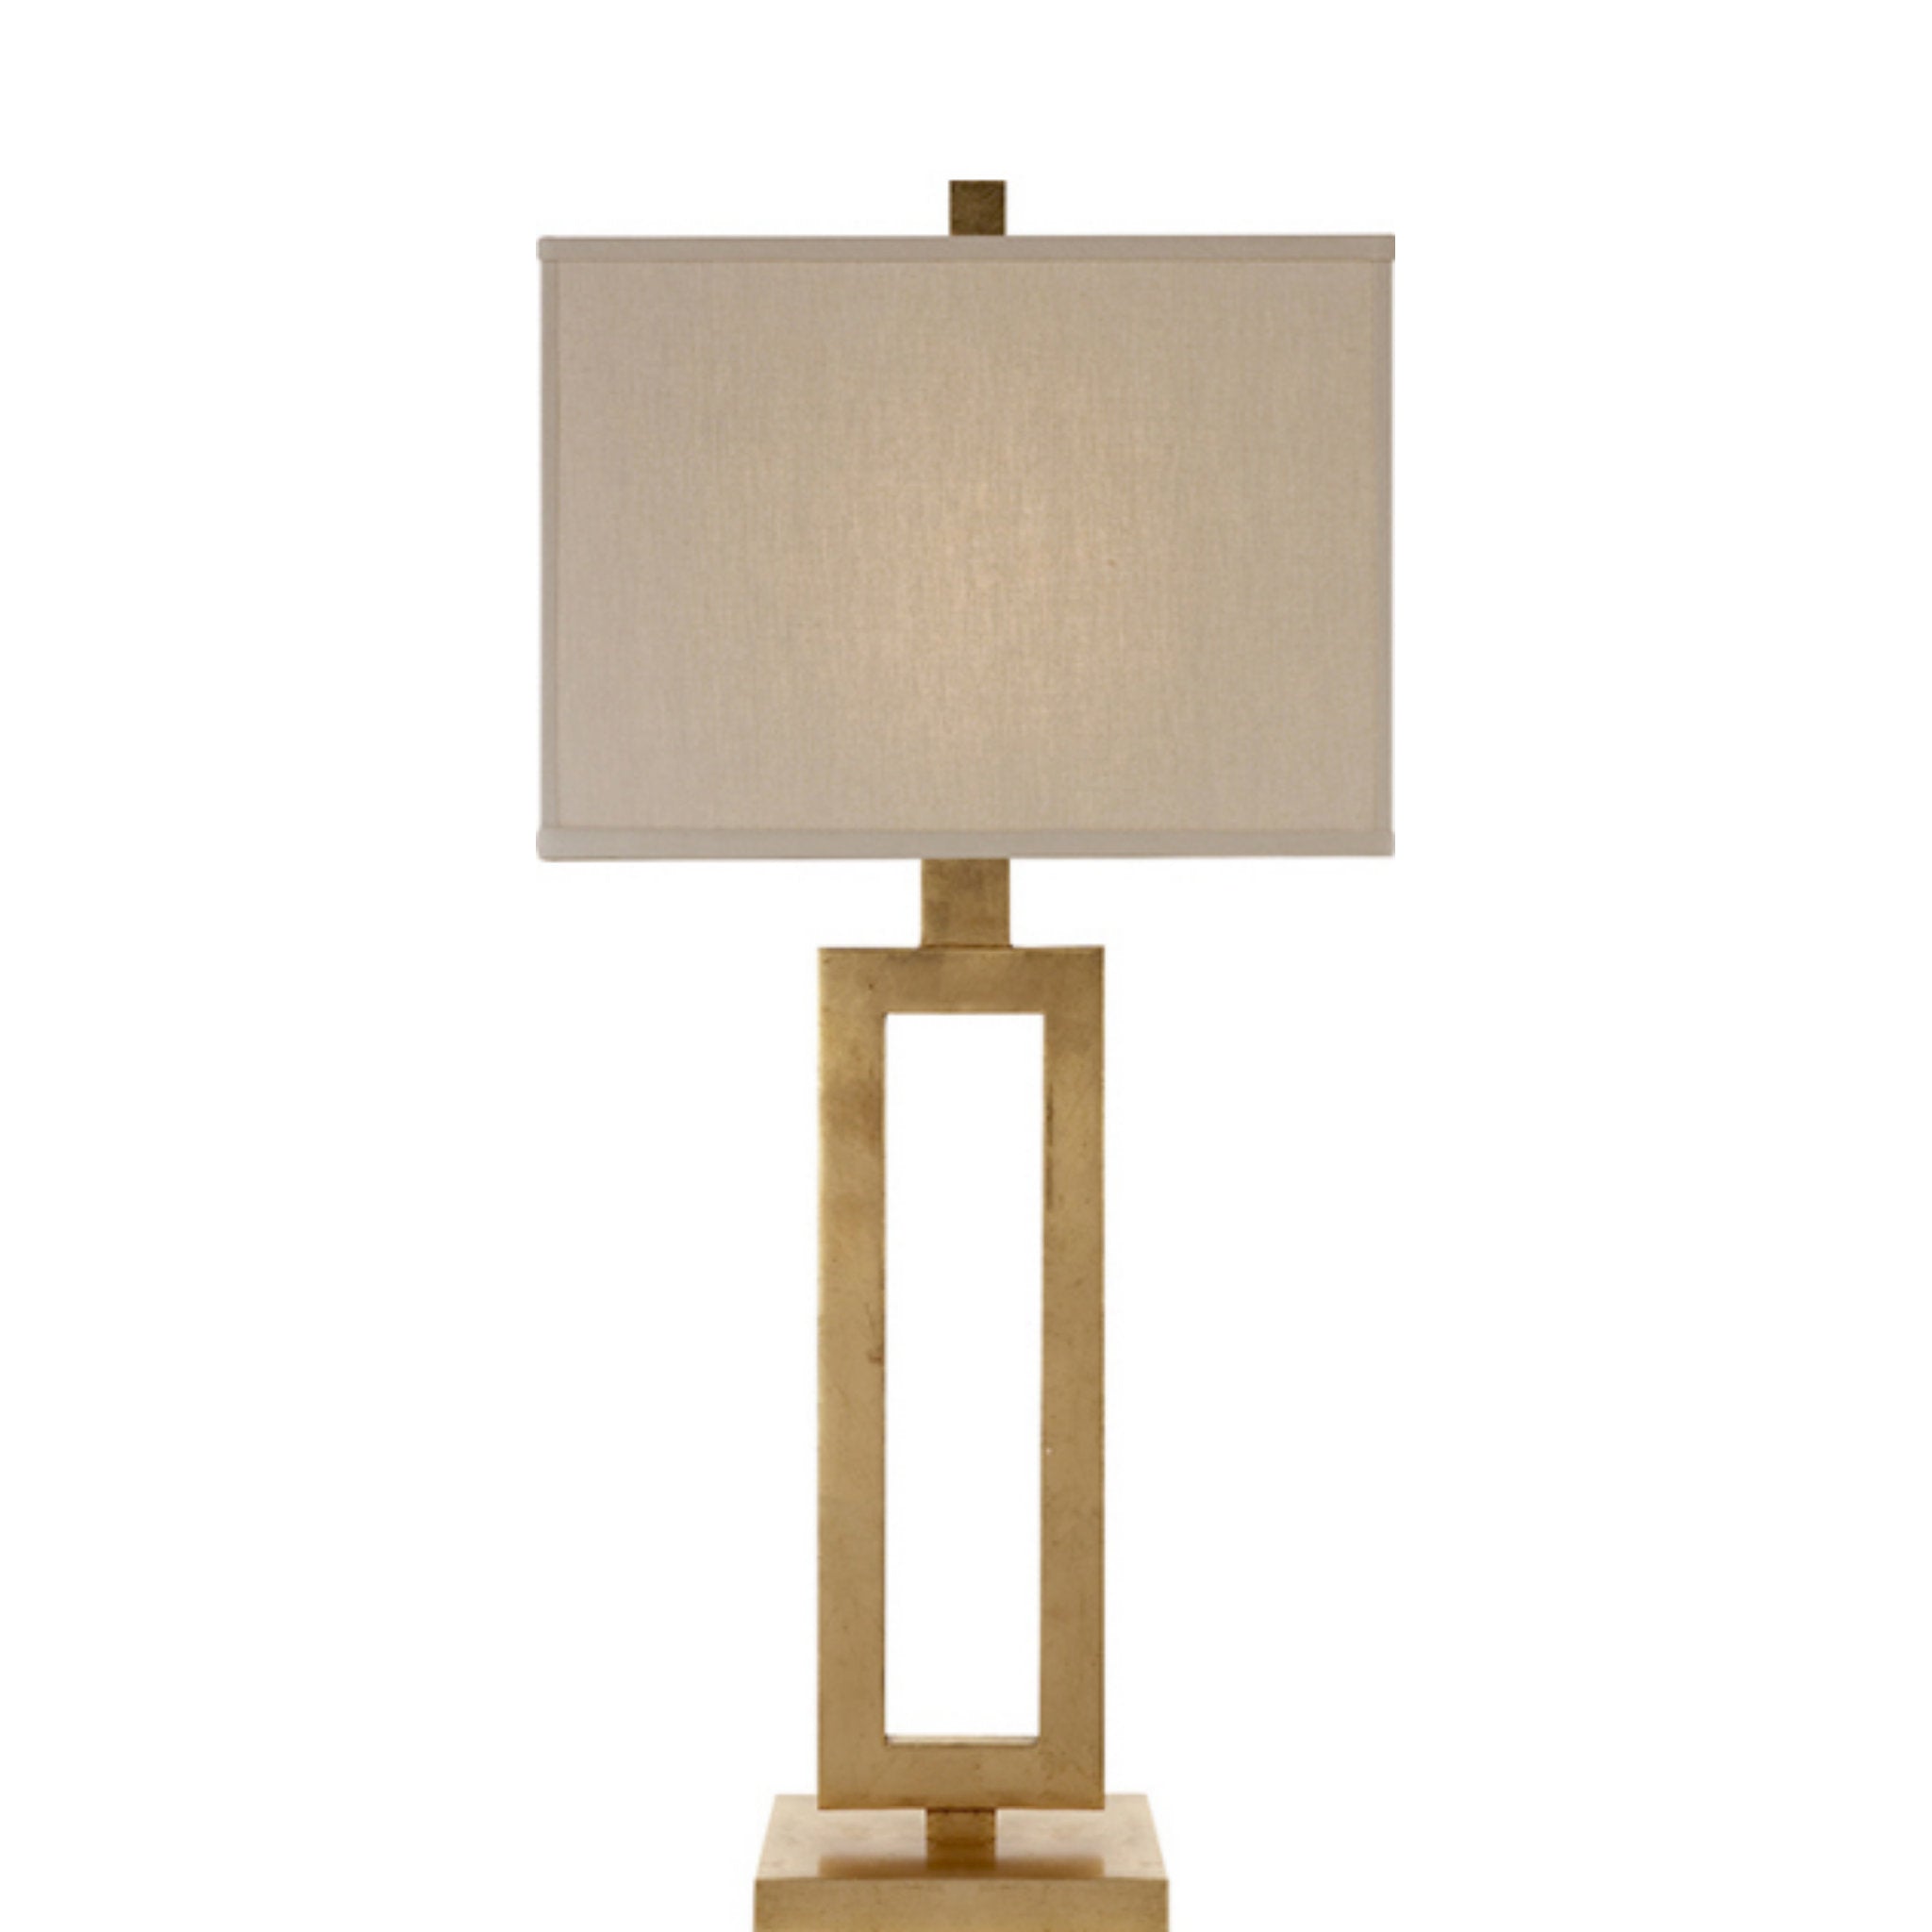 Suzanne Kasler Mod Tall Table Lamp in Gild with Linen Shade